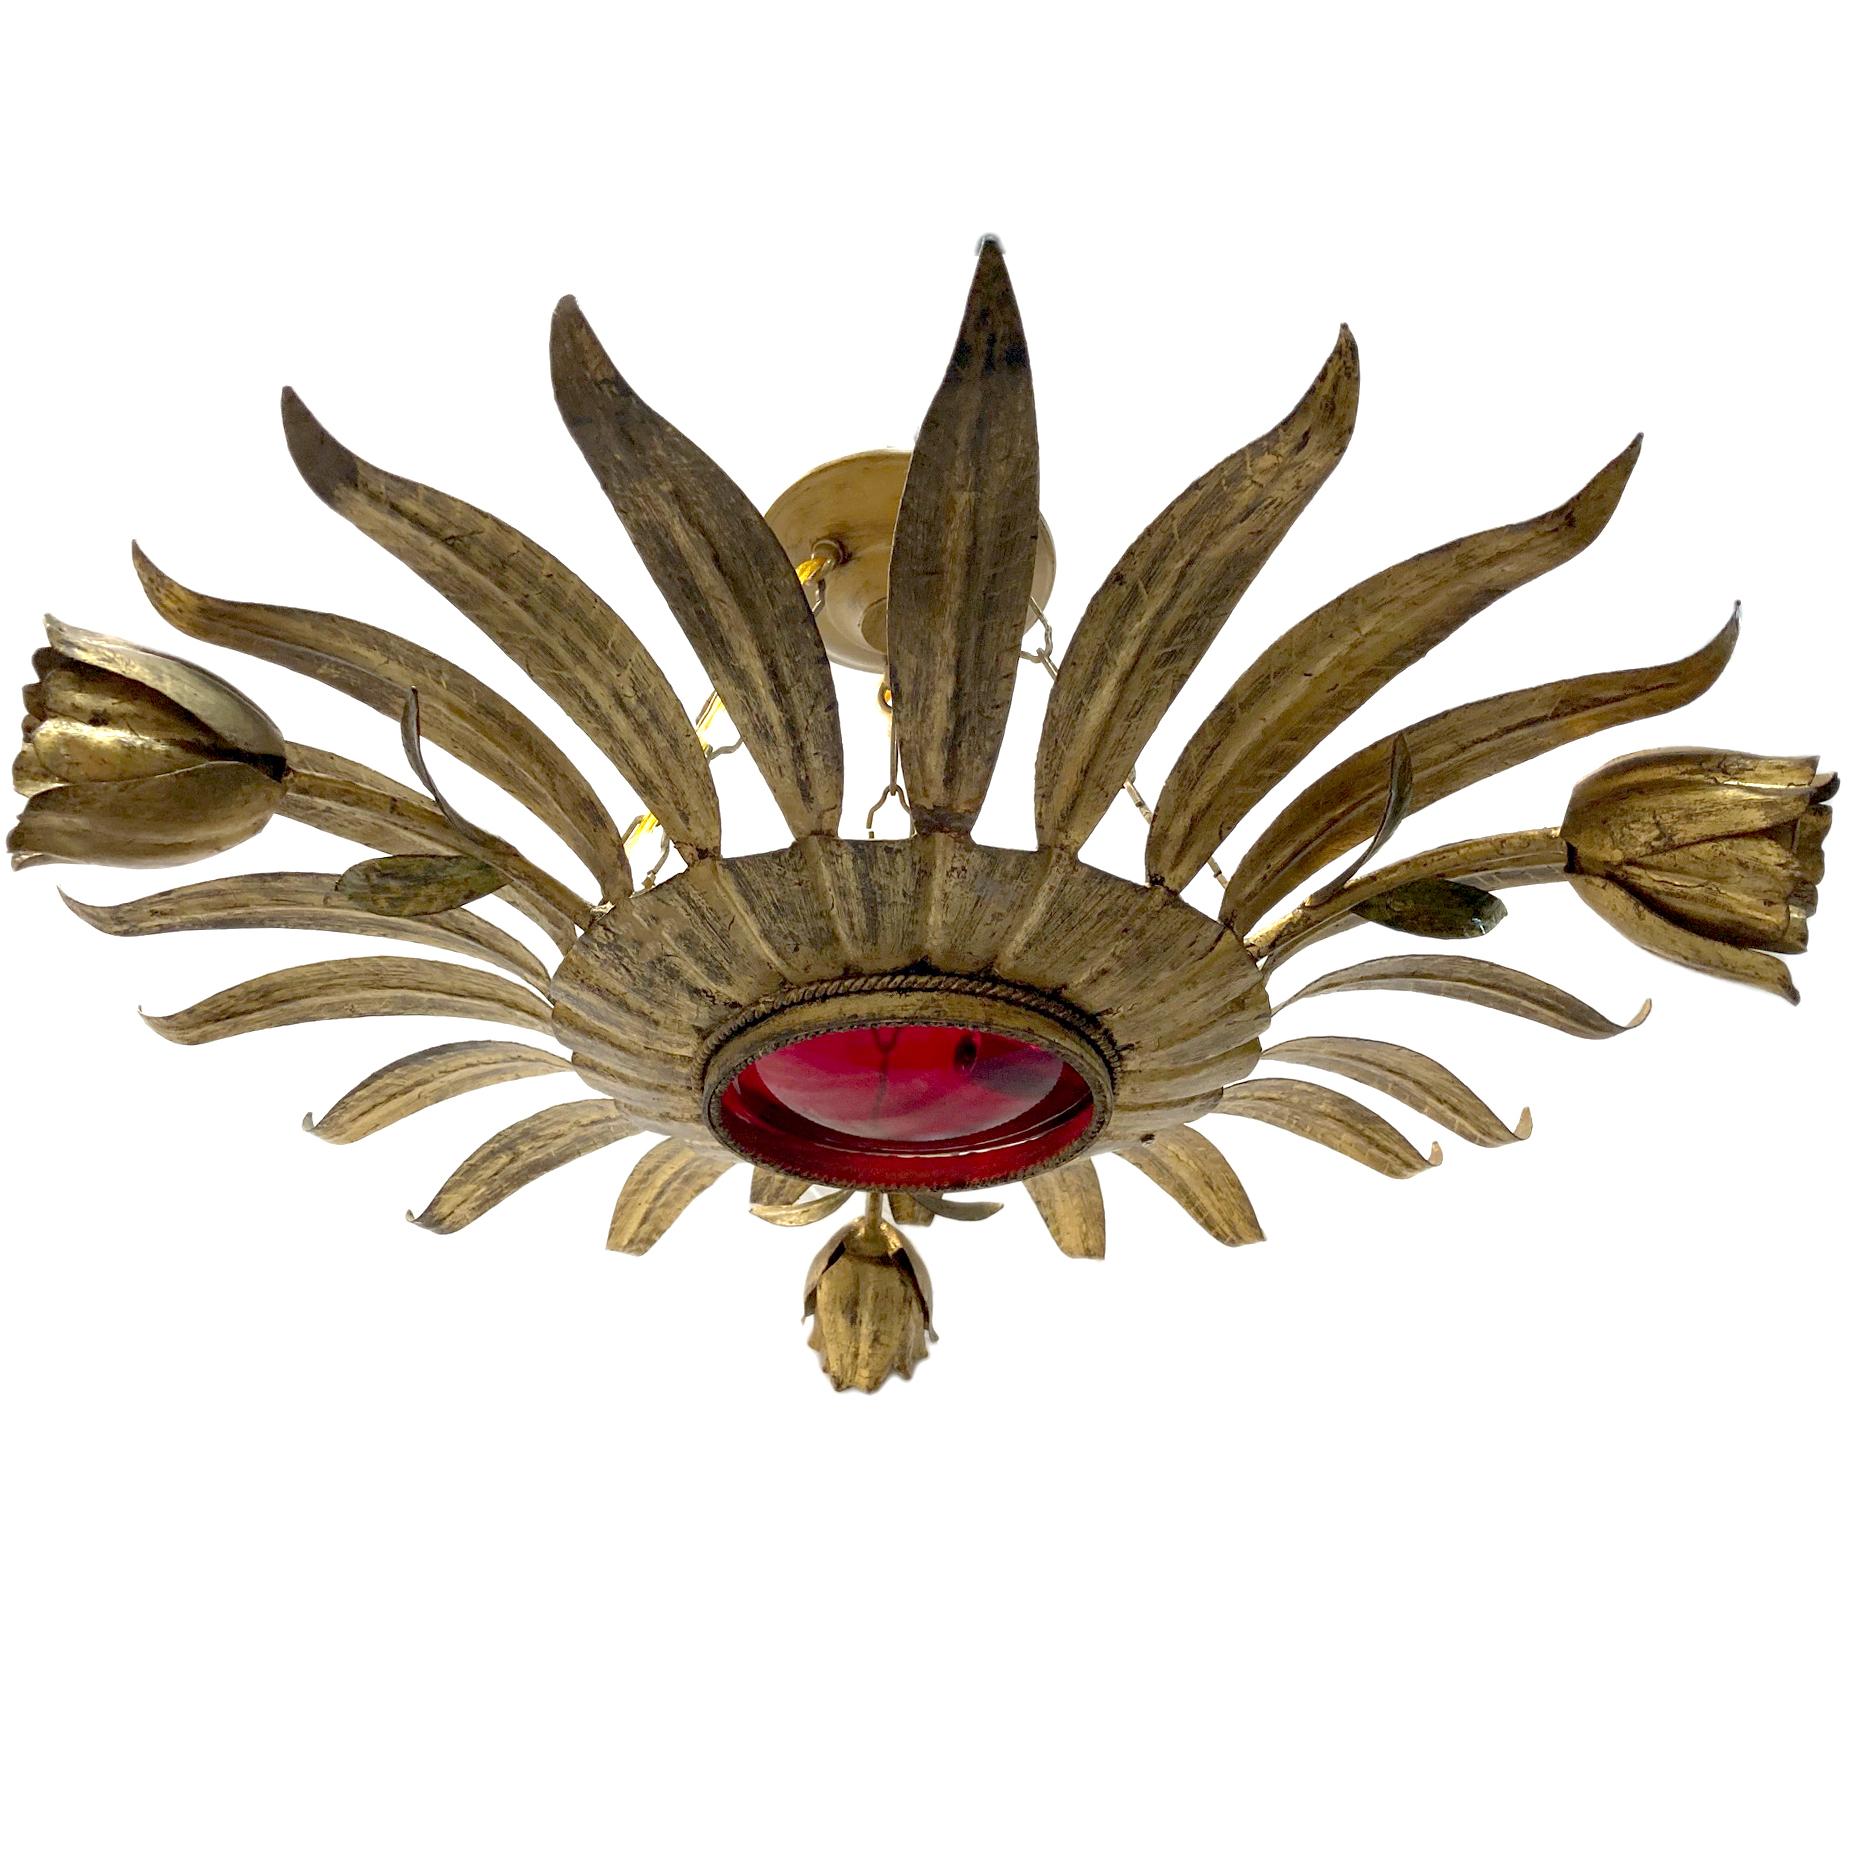 A circa 1950's gilt metal sunburst light fixture with four interior candelabra lights, one light in each flower and original ruby red glass inset.

Measurements:
Diameter: 24